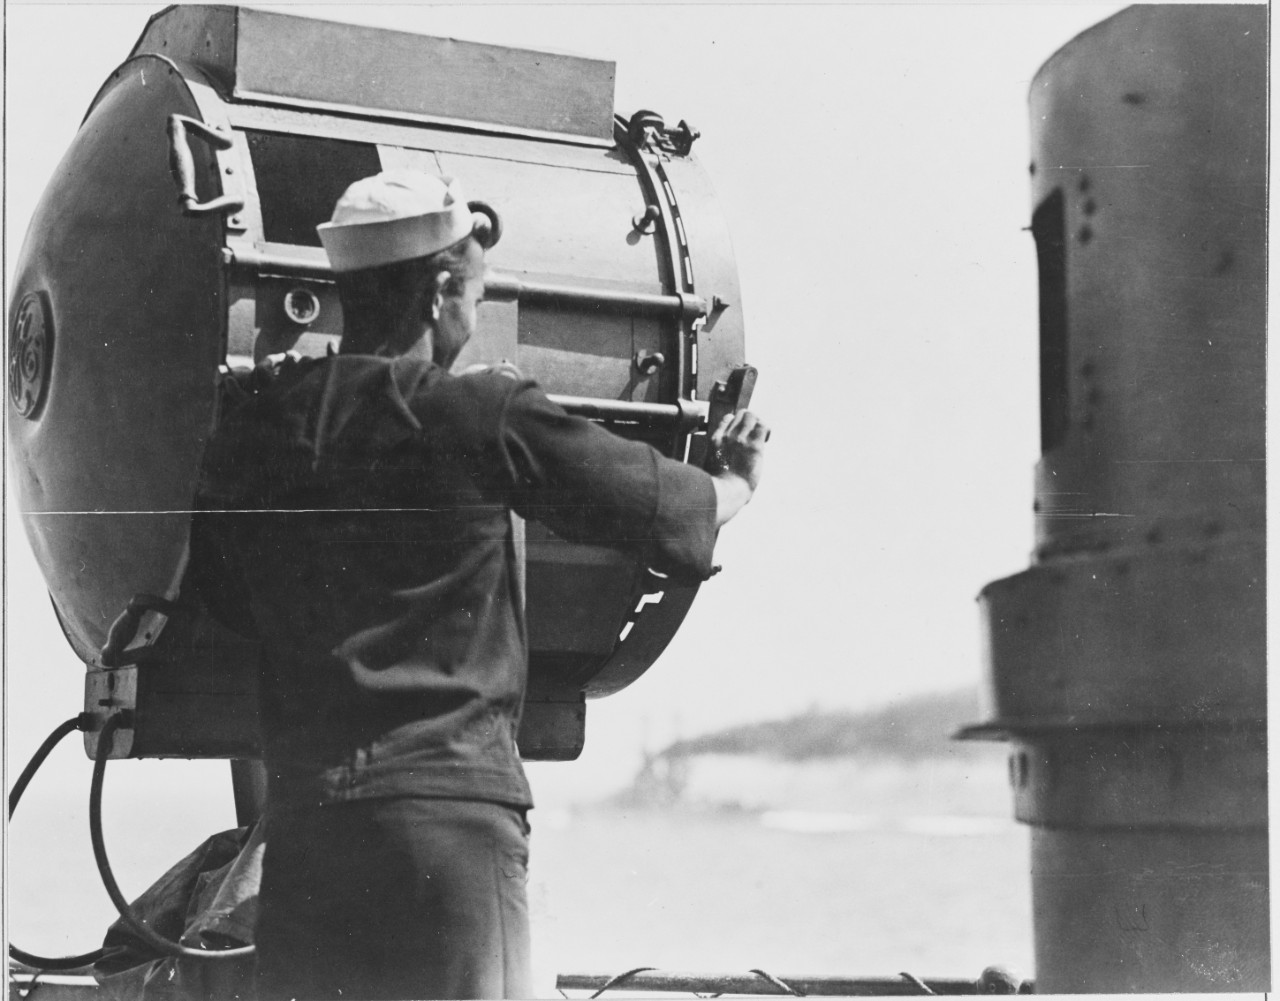 Sailor stands next to searchlight on battleship